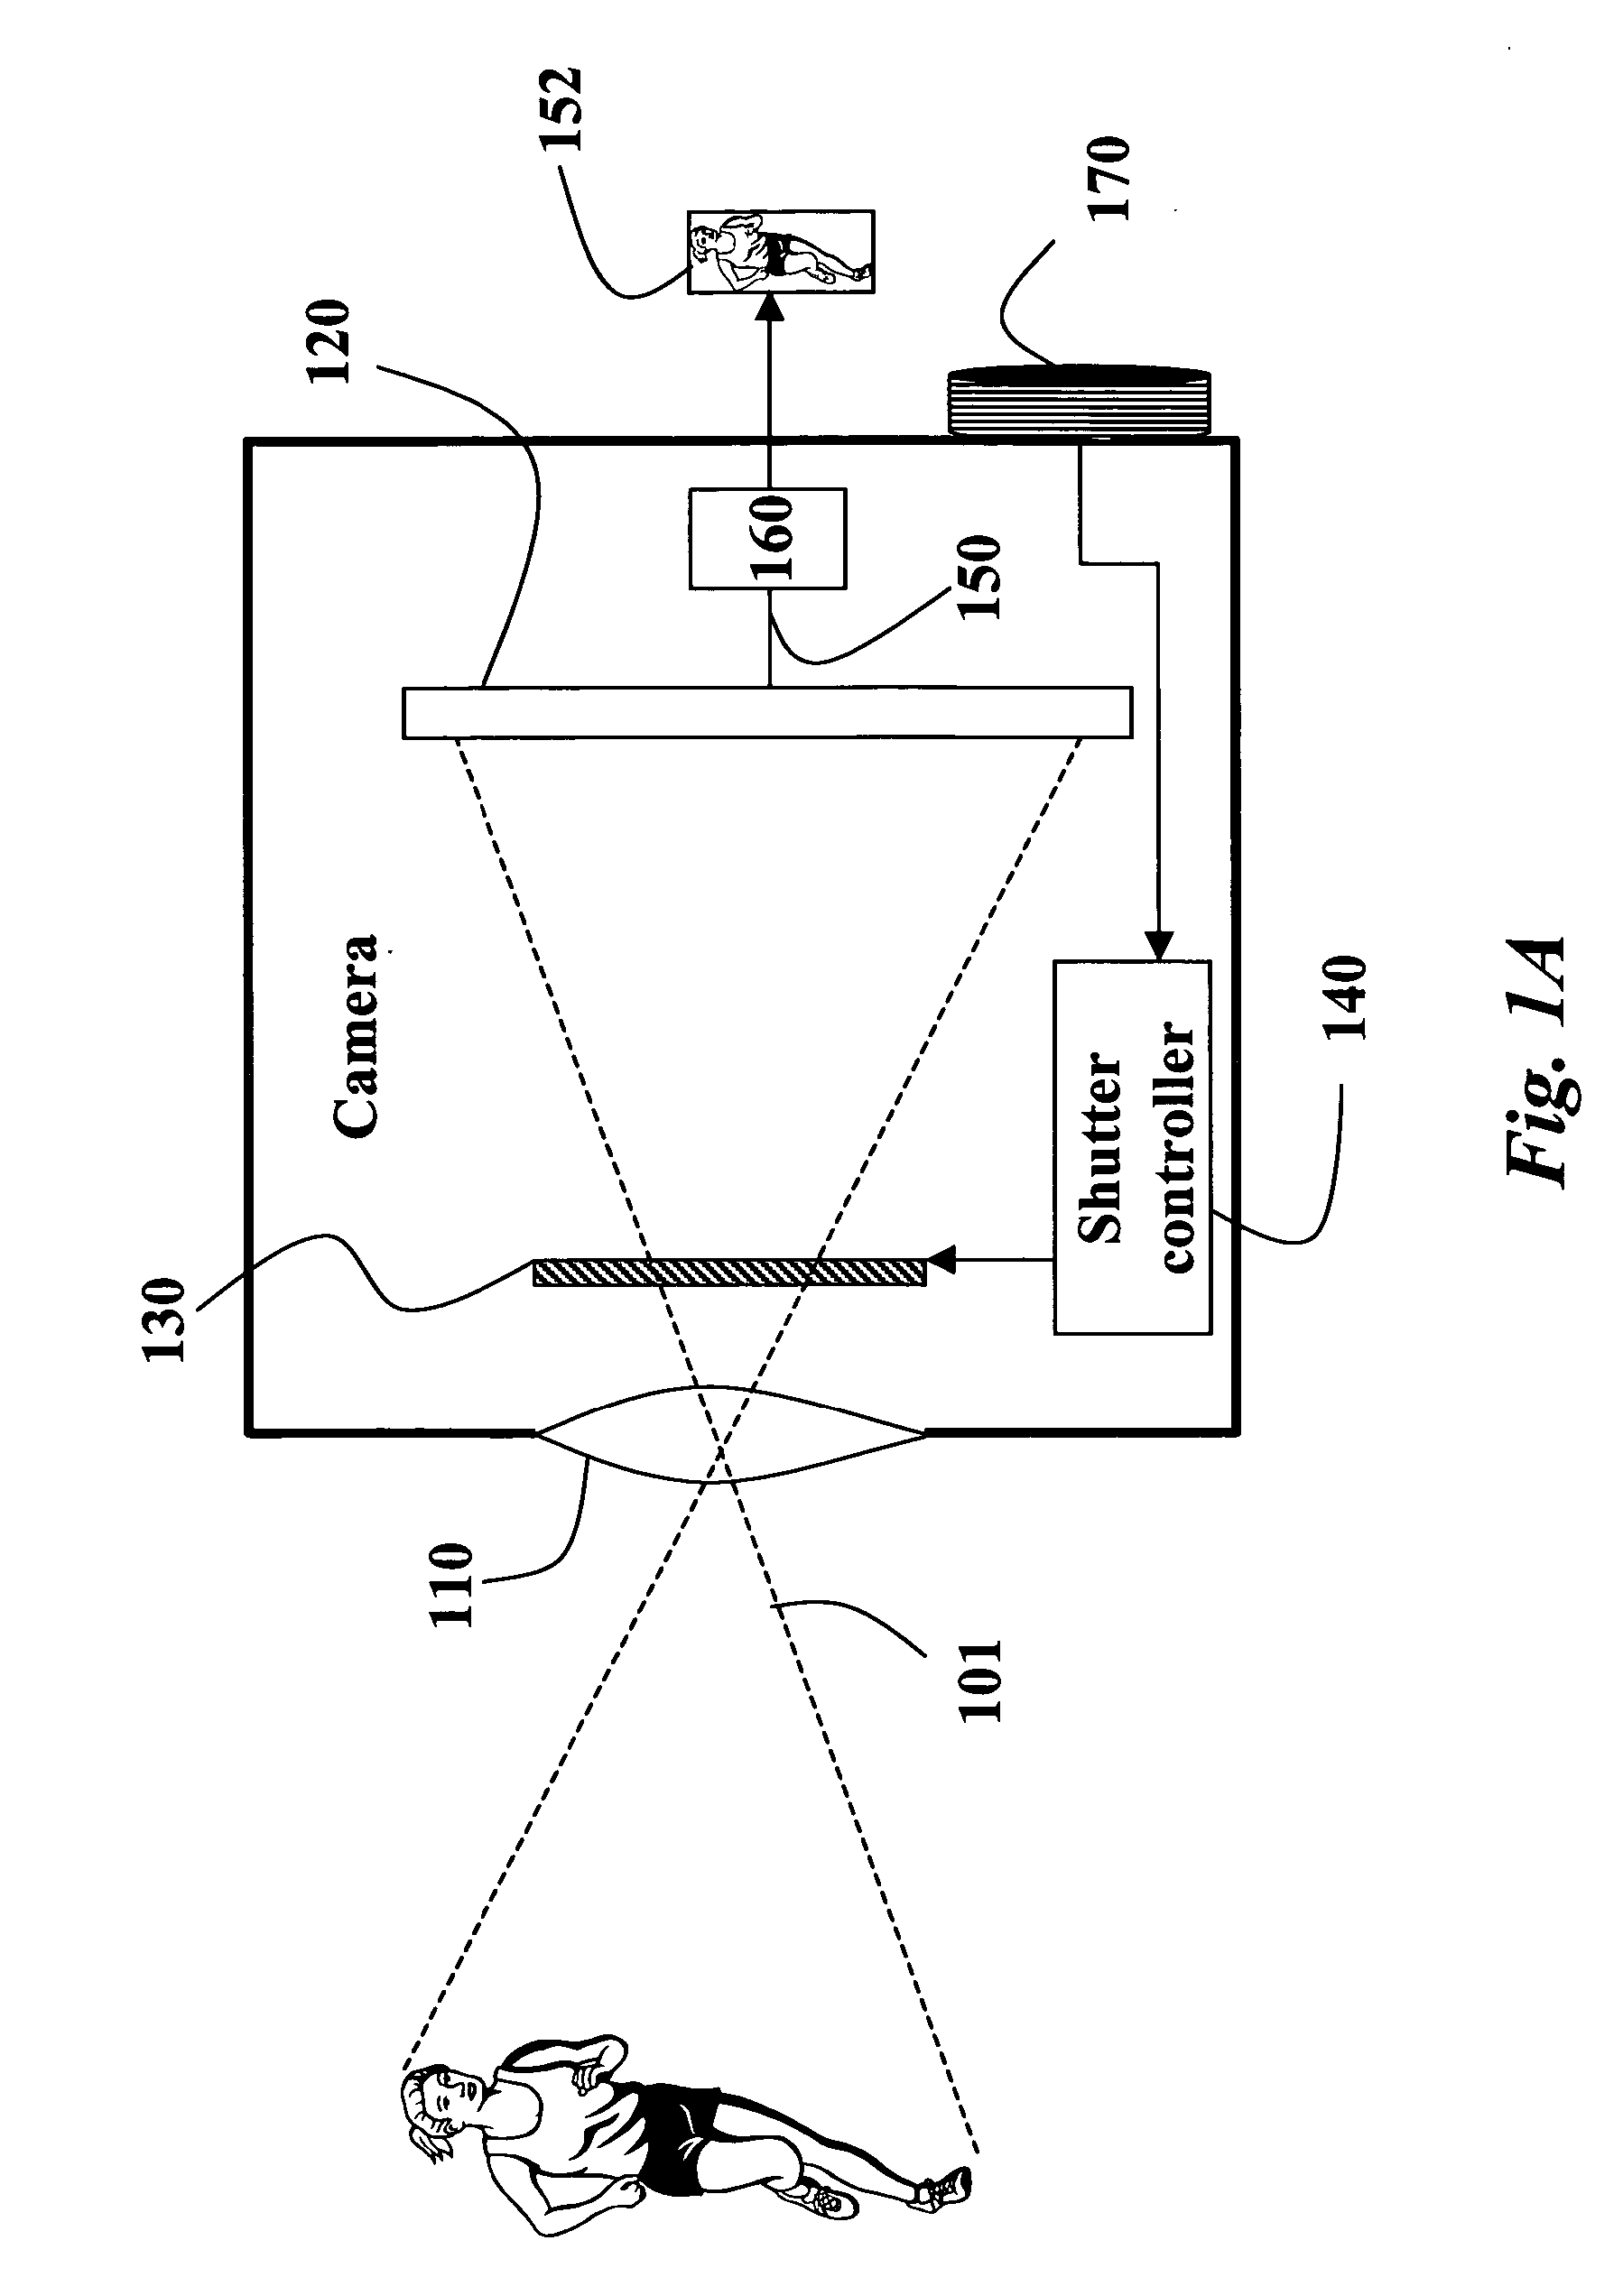 Method for deblurring images using optimized temporal coding patterns